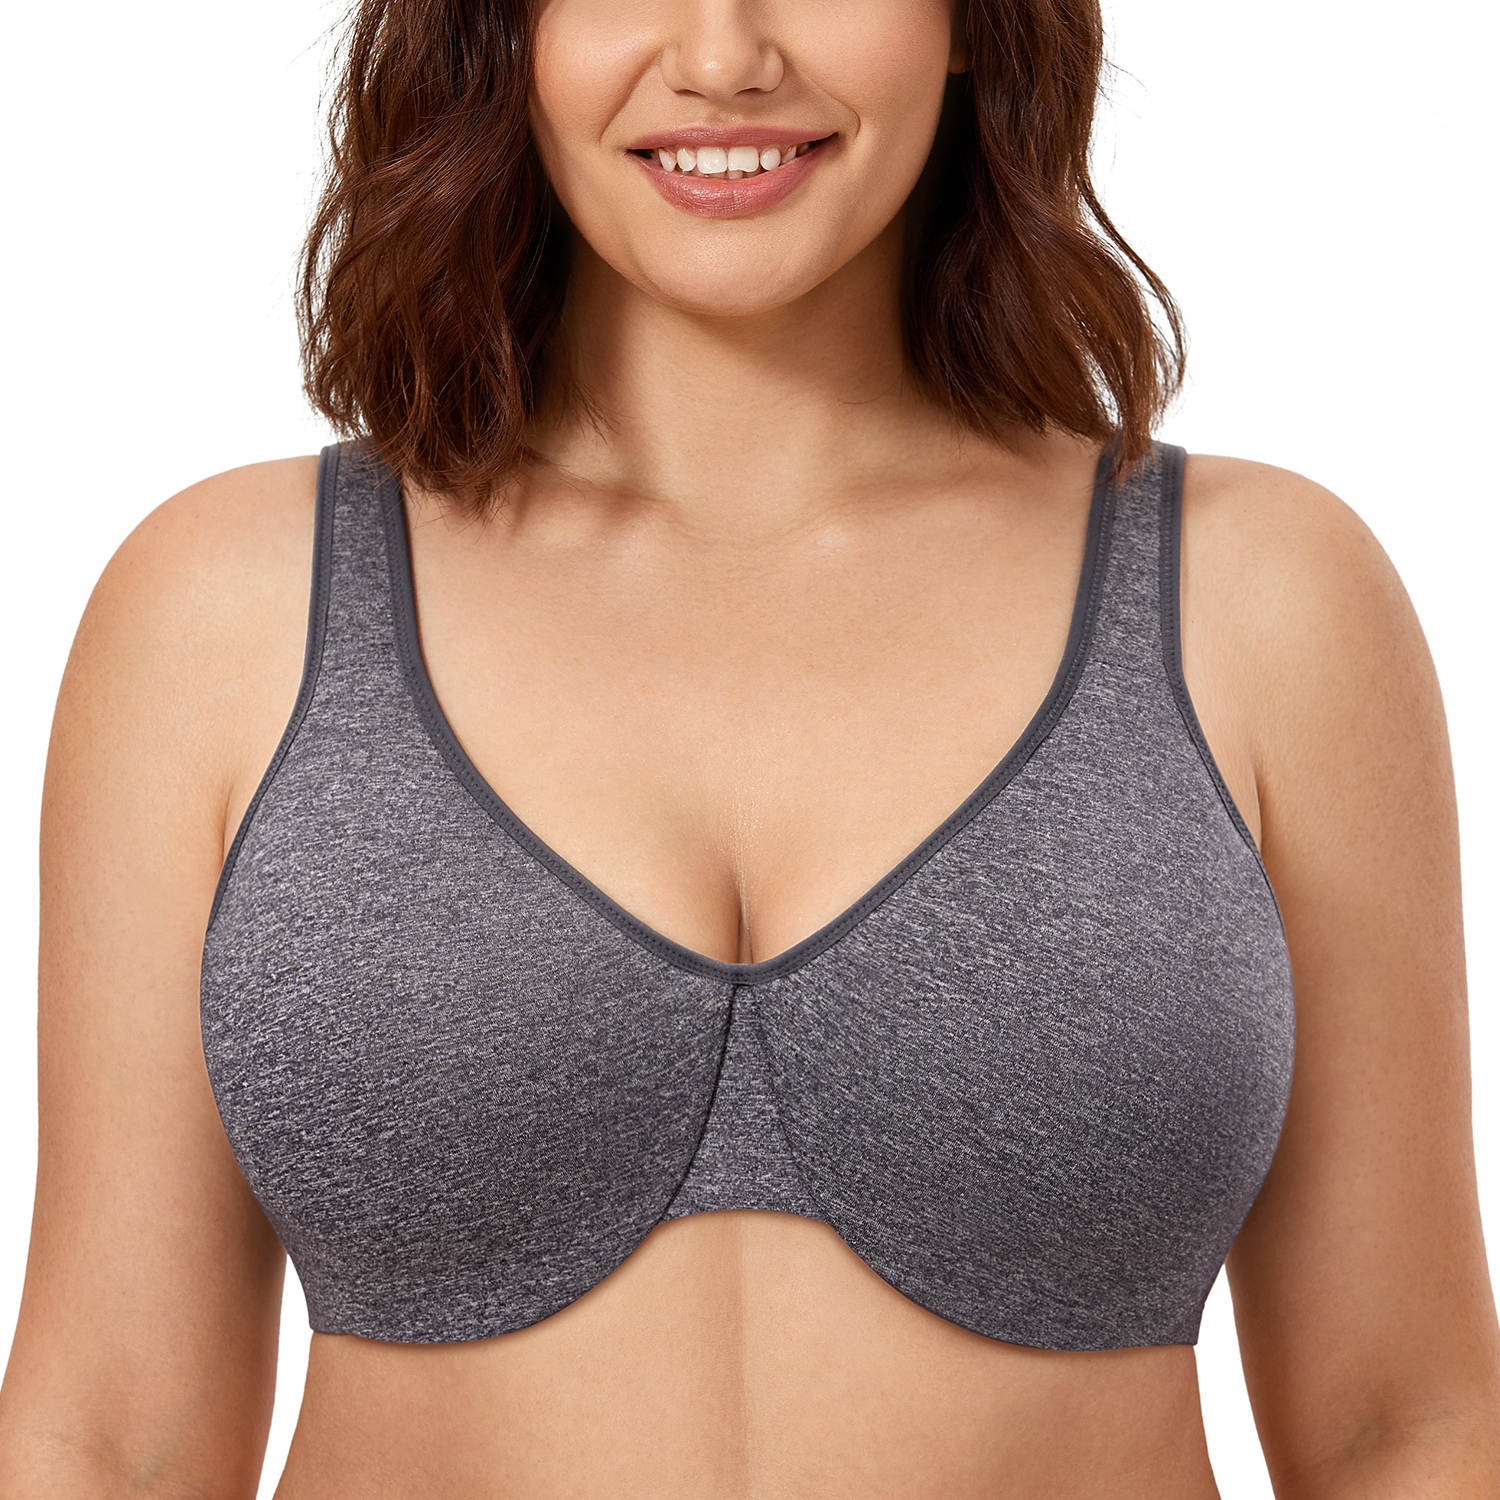 DELIMIRA Women's Non Padded Full Coverage Lace Underwired Bra Plus